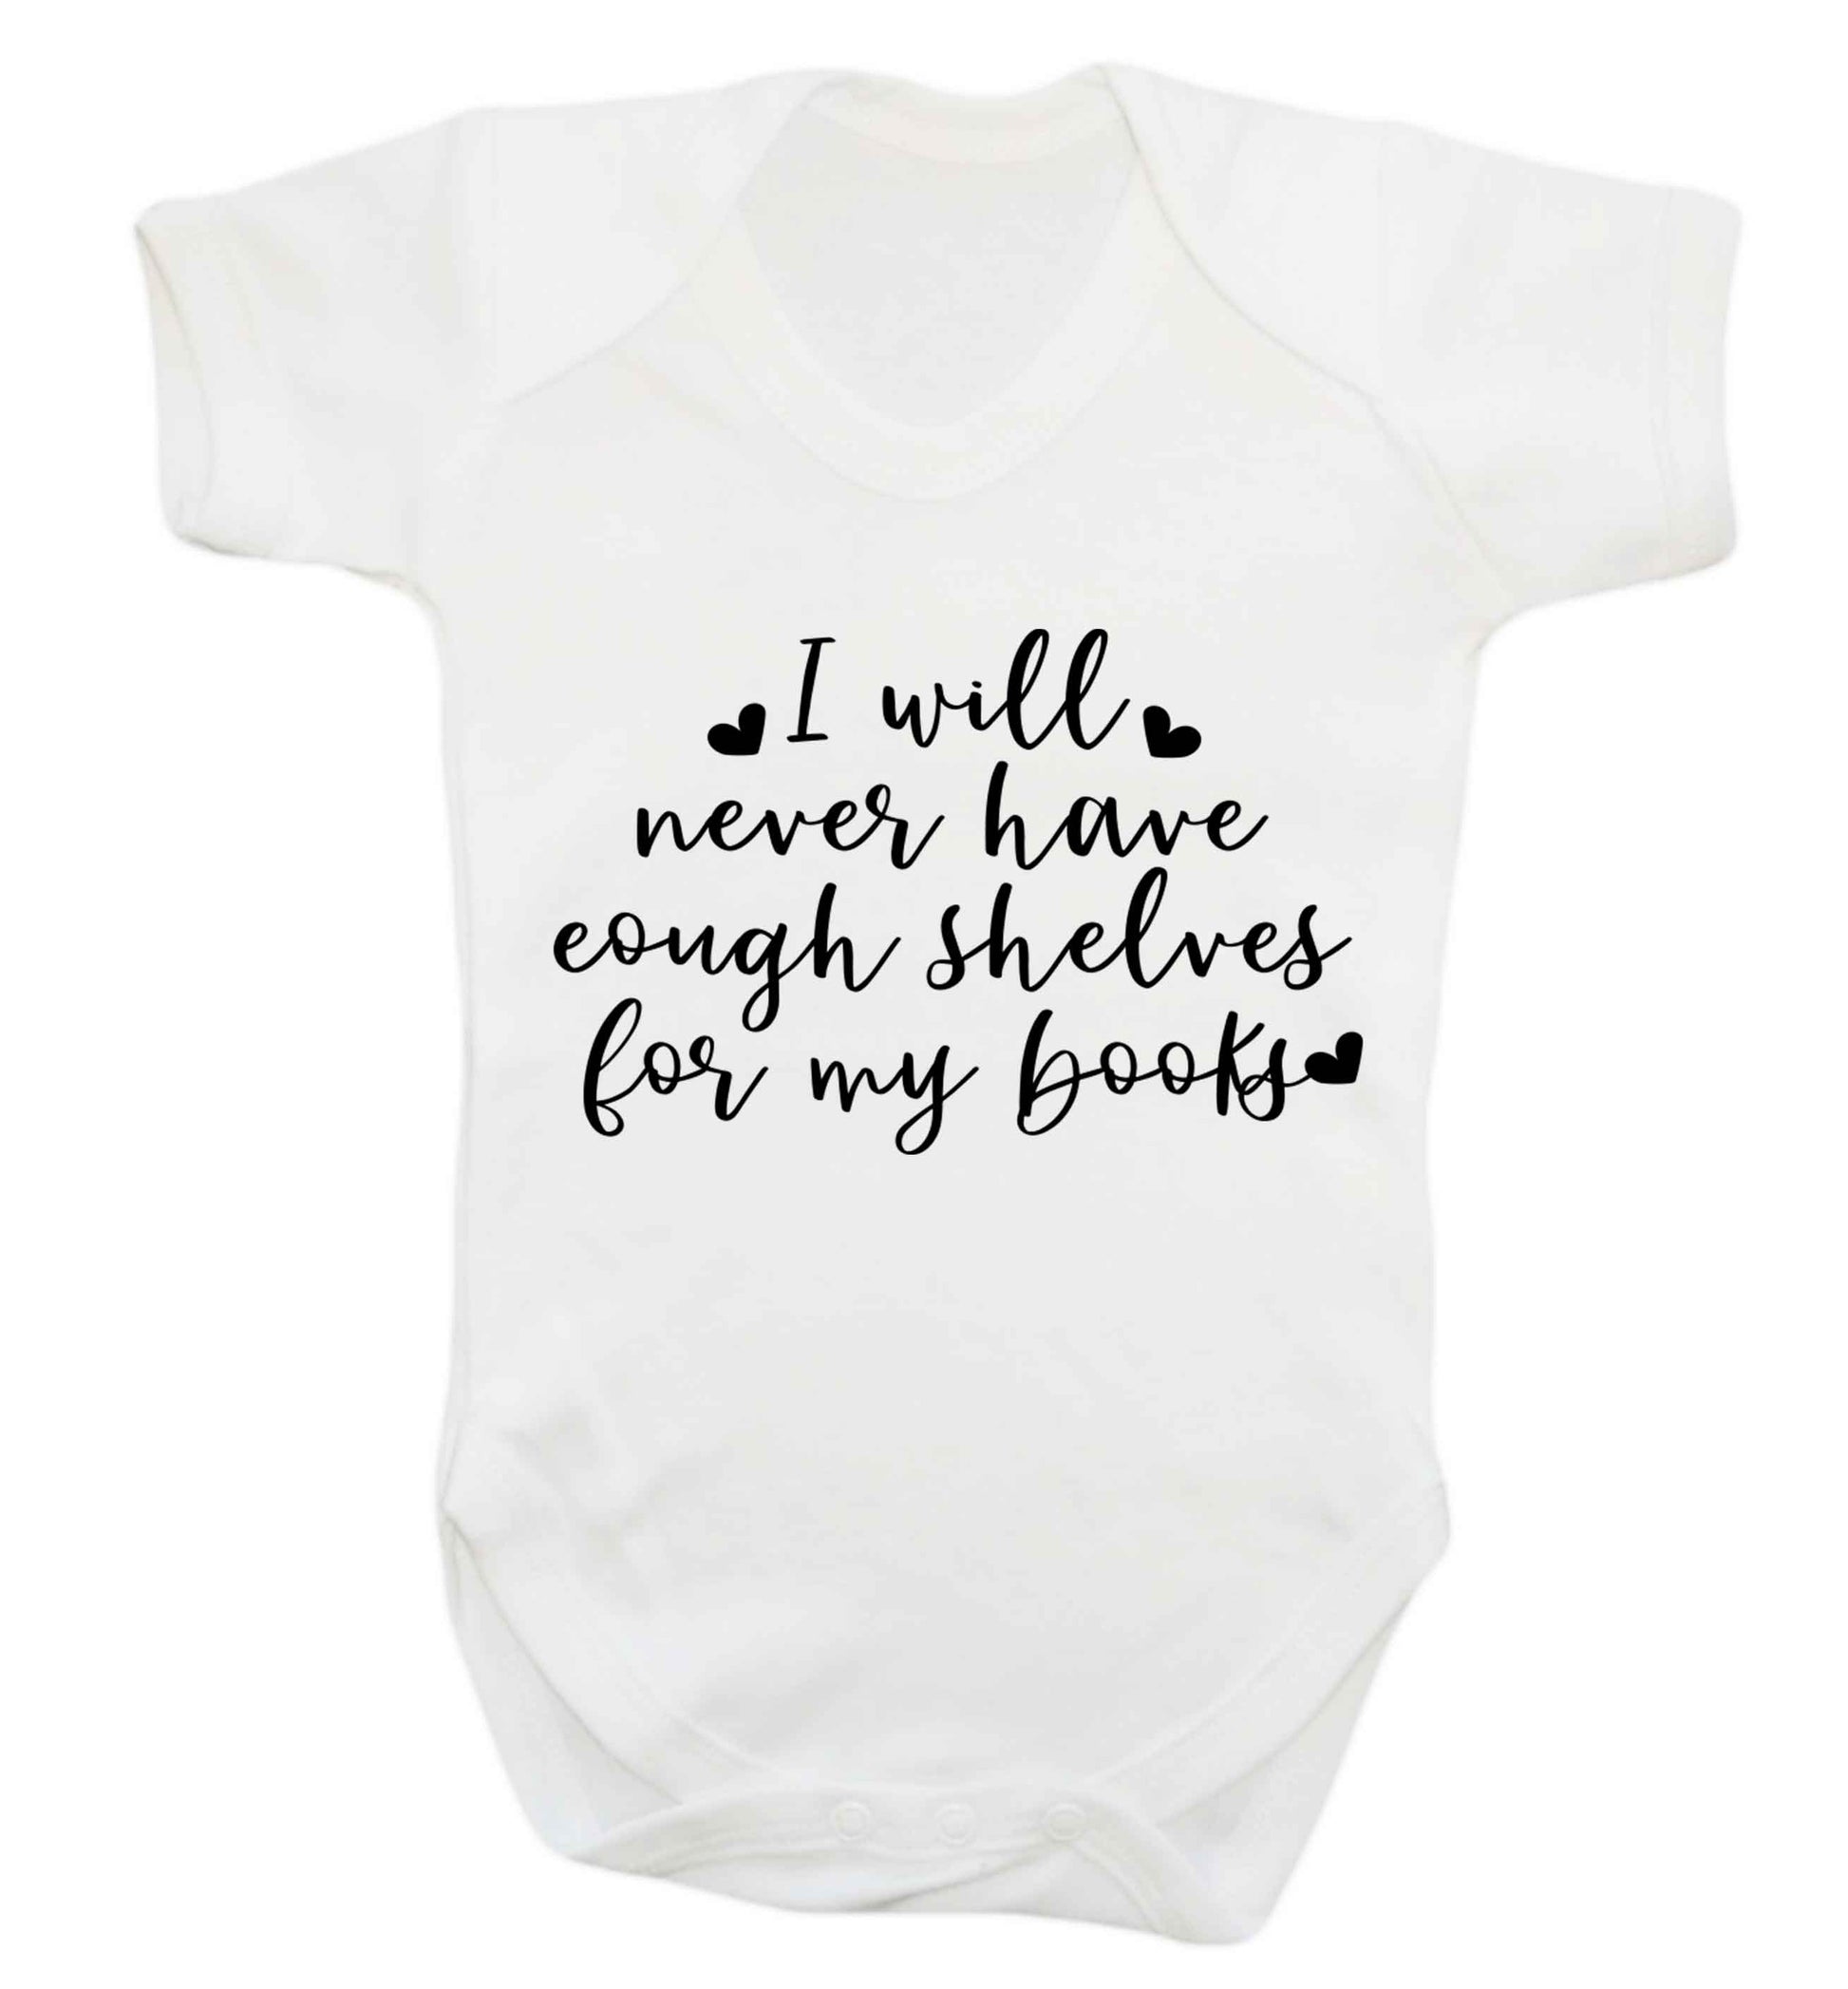 I will never have enough shelves for my books Baby Vest white 18-24 months